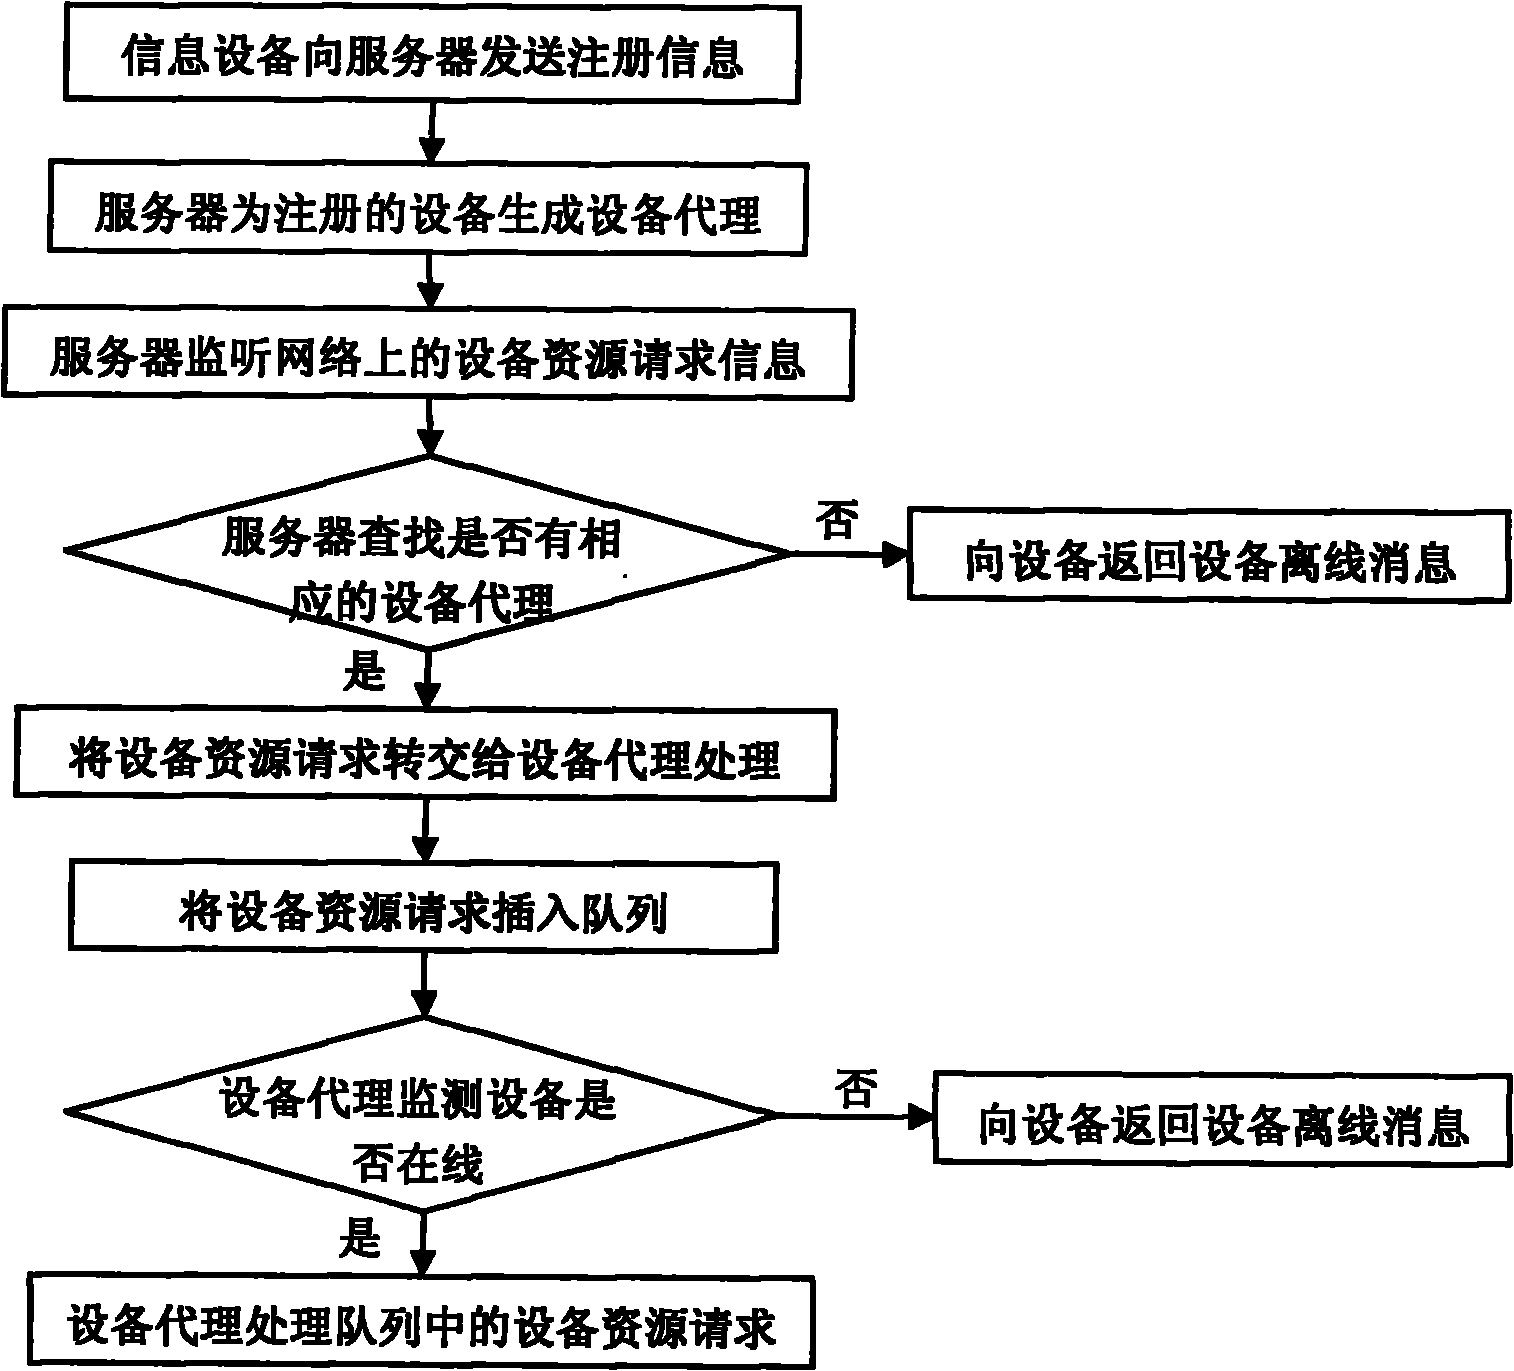 Method for sharing information equipment resources by utilizing equipment agent system